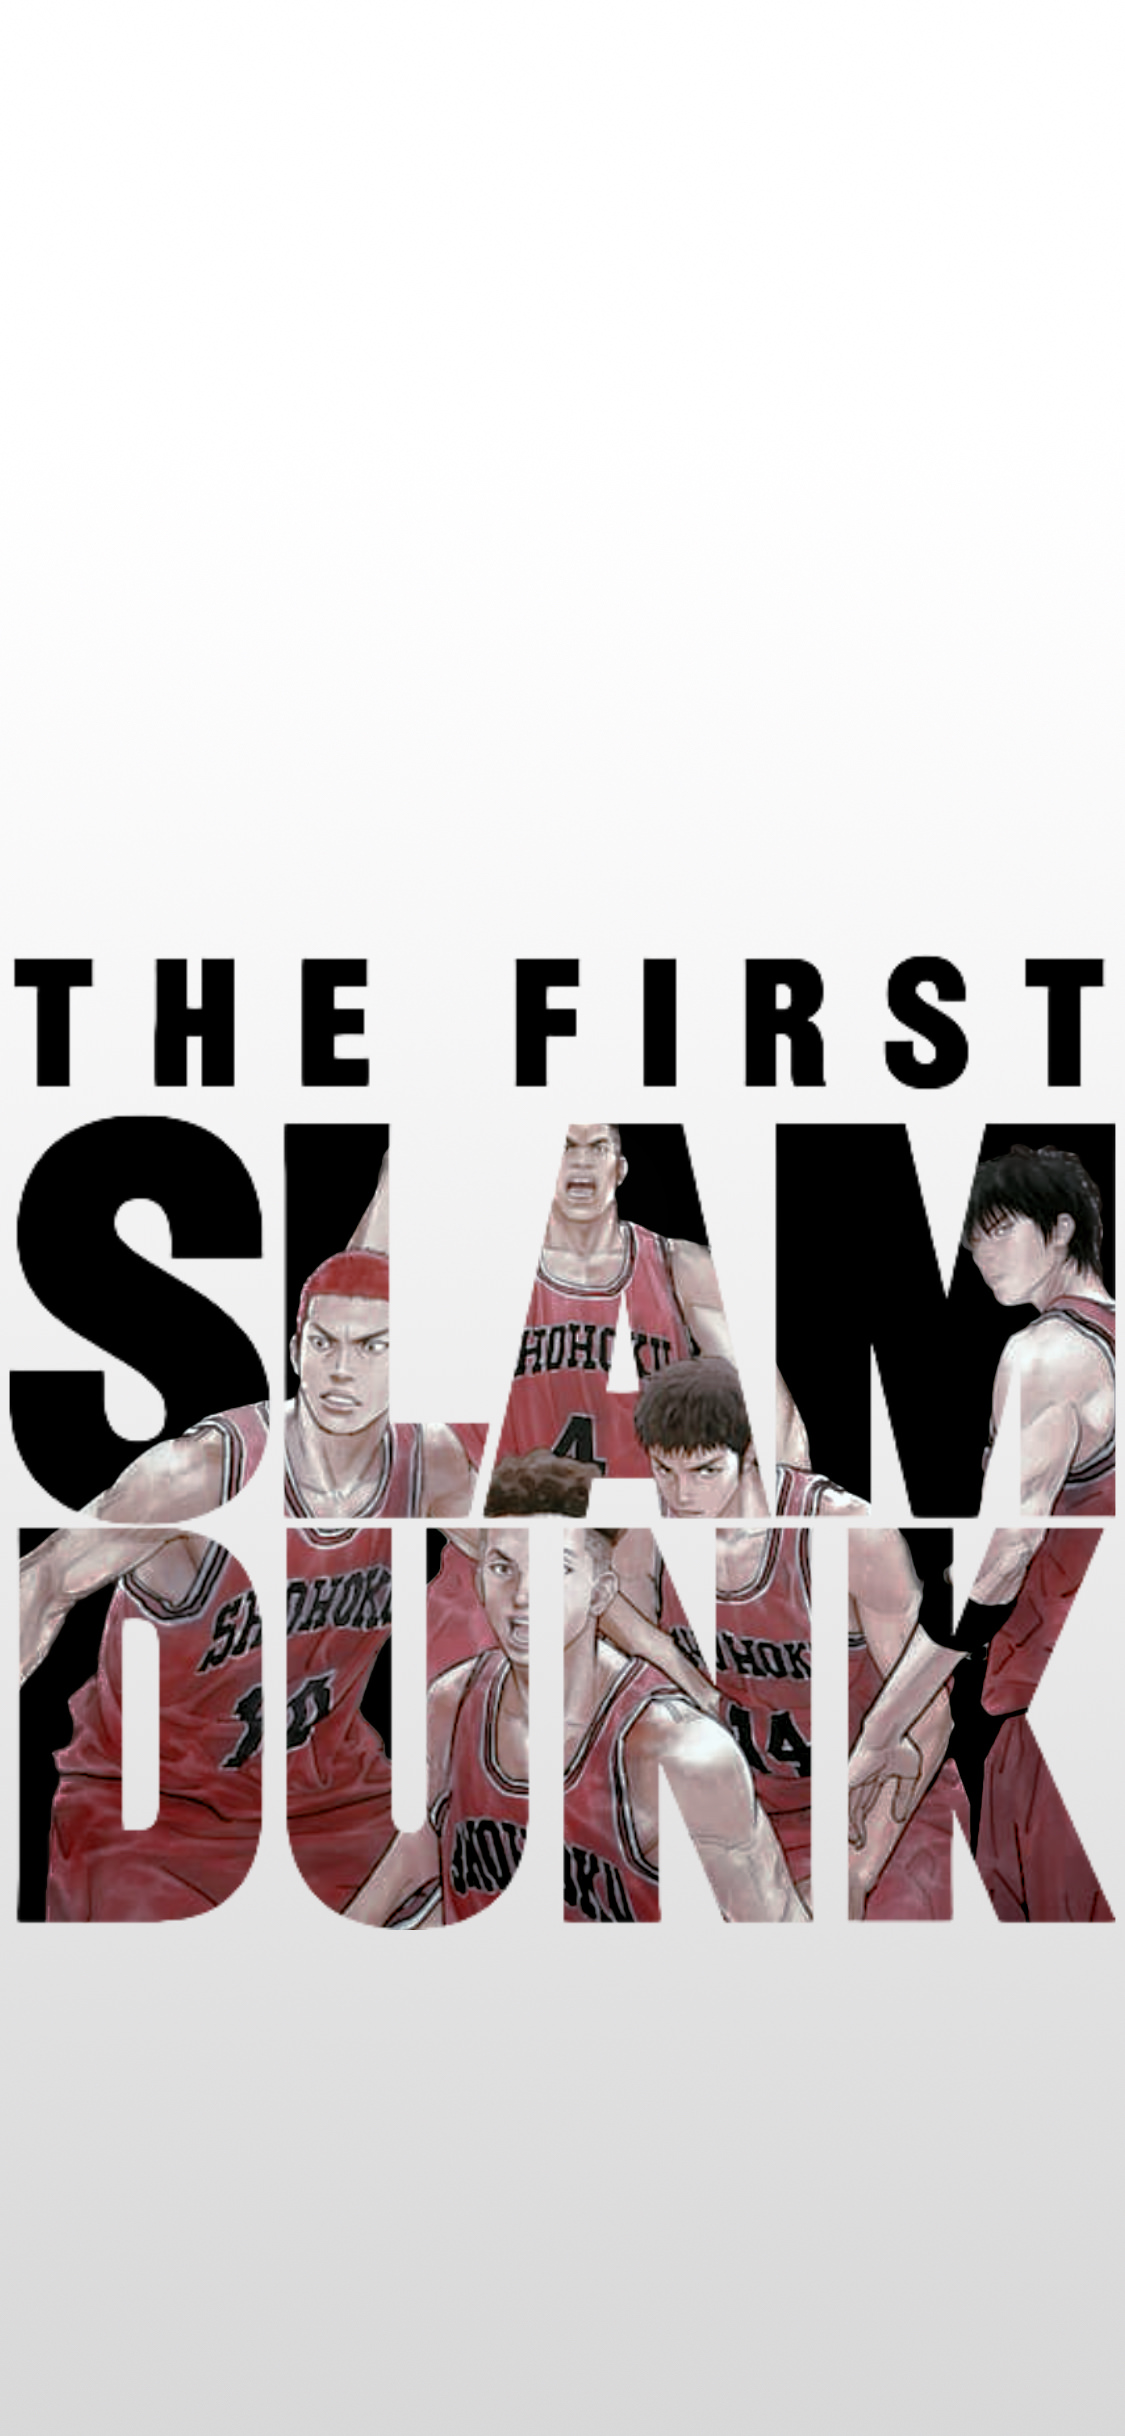 1stslamdunk08 - THE FIRST SLAM DUNKの無料高画質スマホ壁紙19枚 [iPhone＆Androidに対応]